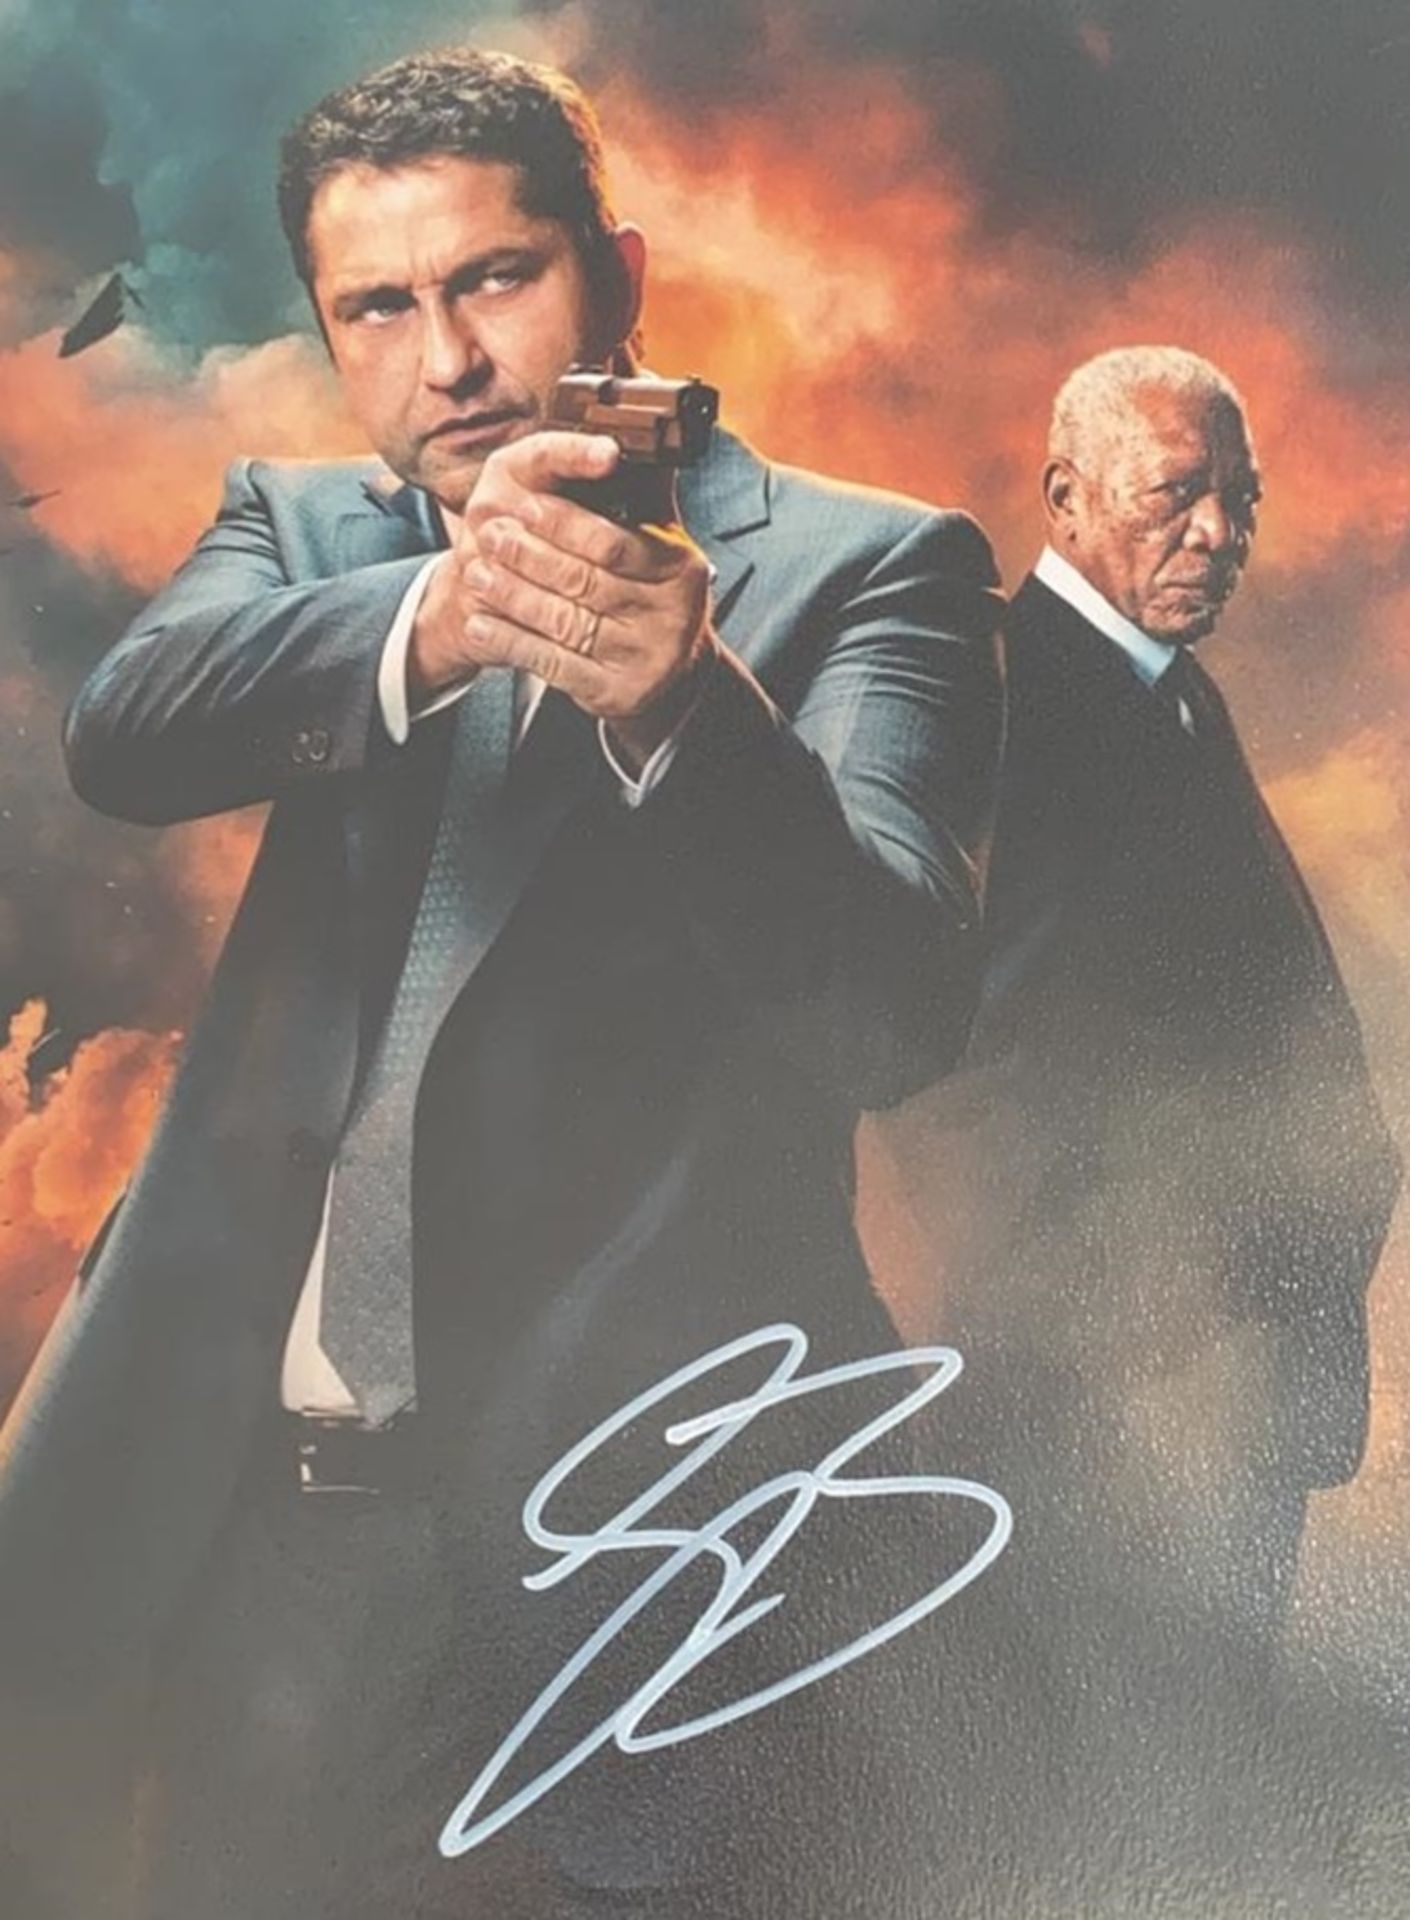 1 x Signed Autograph Picture - GERARD BUTLER ANGEL HAS FALLEN - With COA - Size 12 x 8 Inch - NO VAT